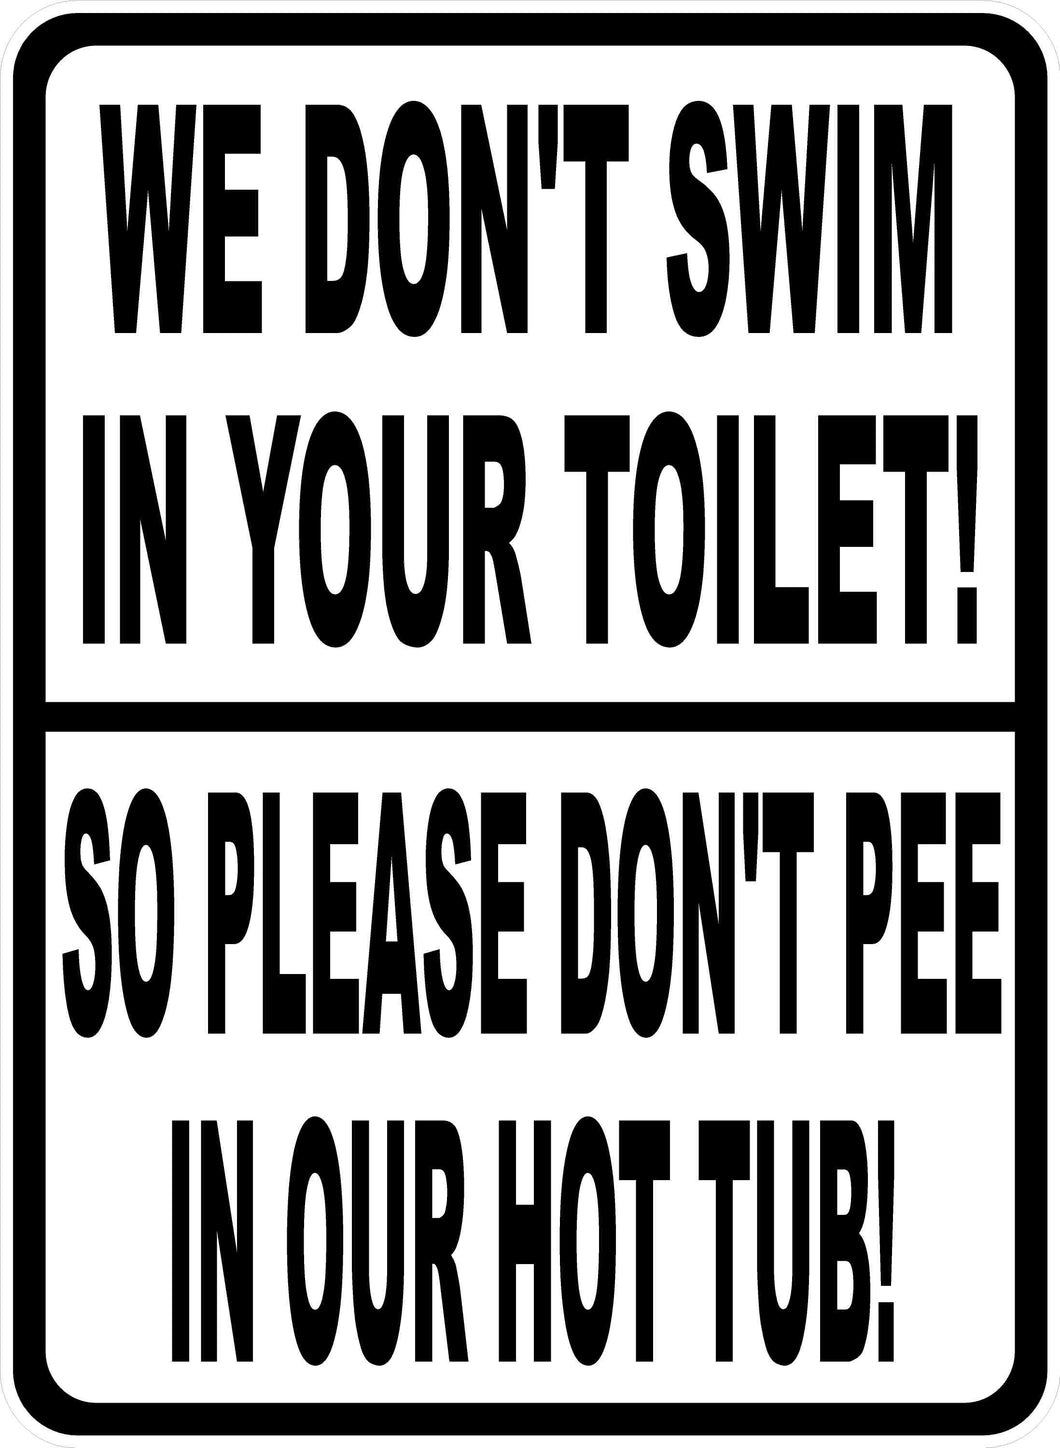 We Don't Swim In Your Toilet So Please Don't Pee In Our Hot Tub Sign